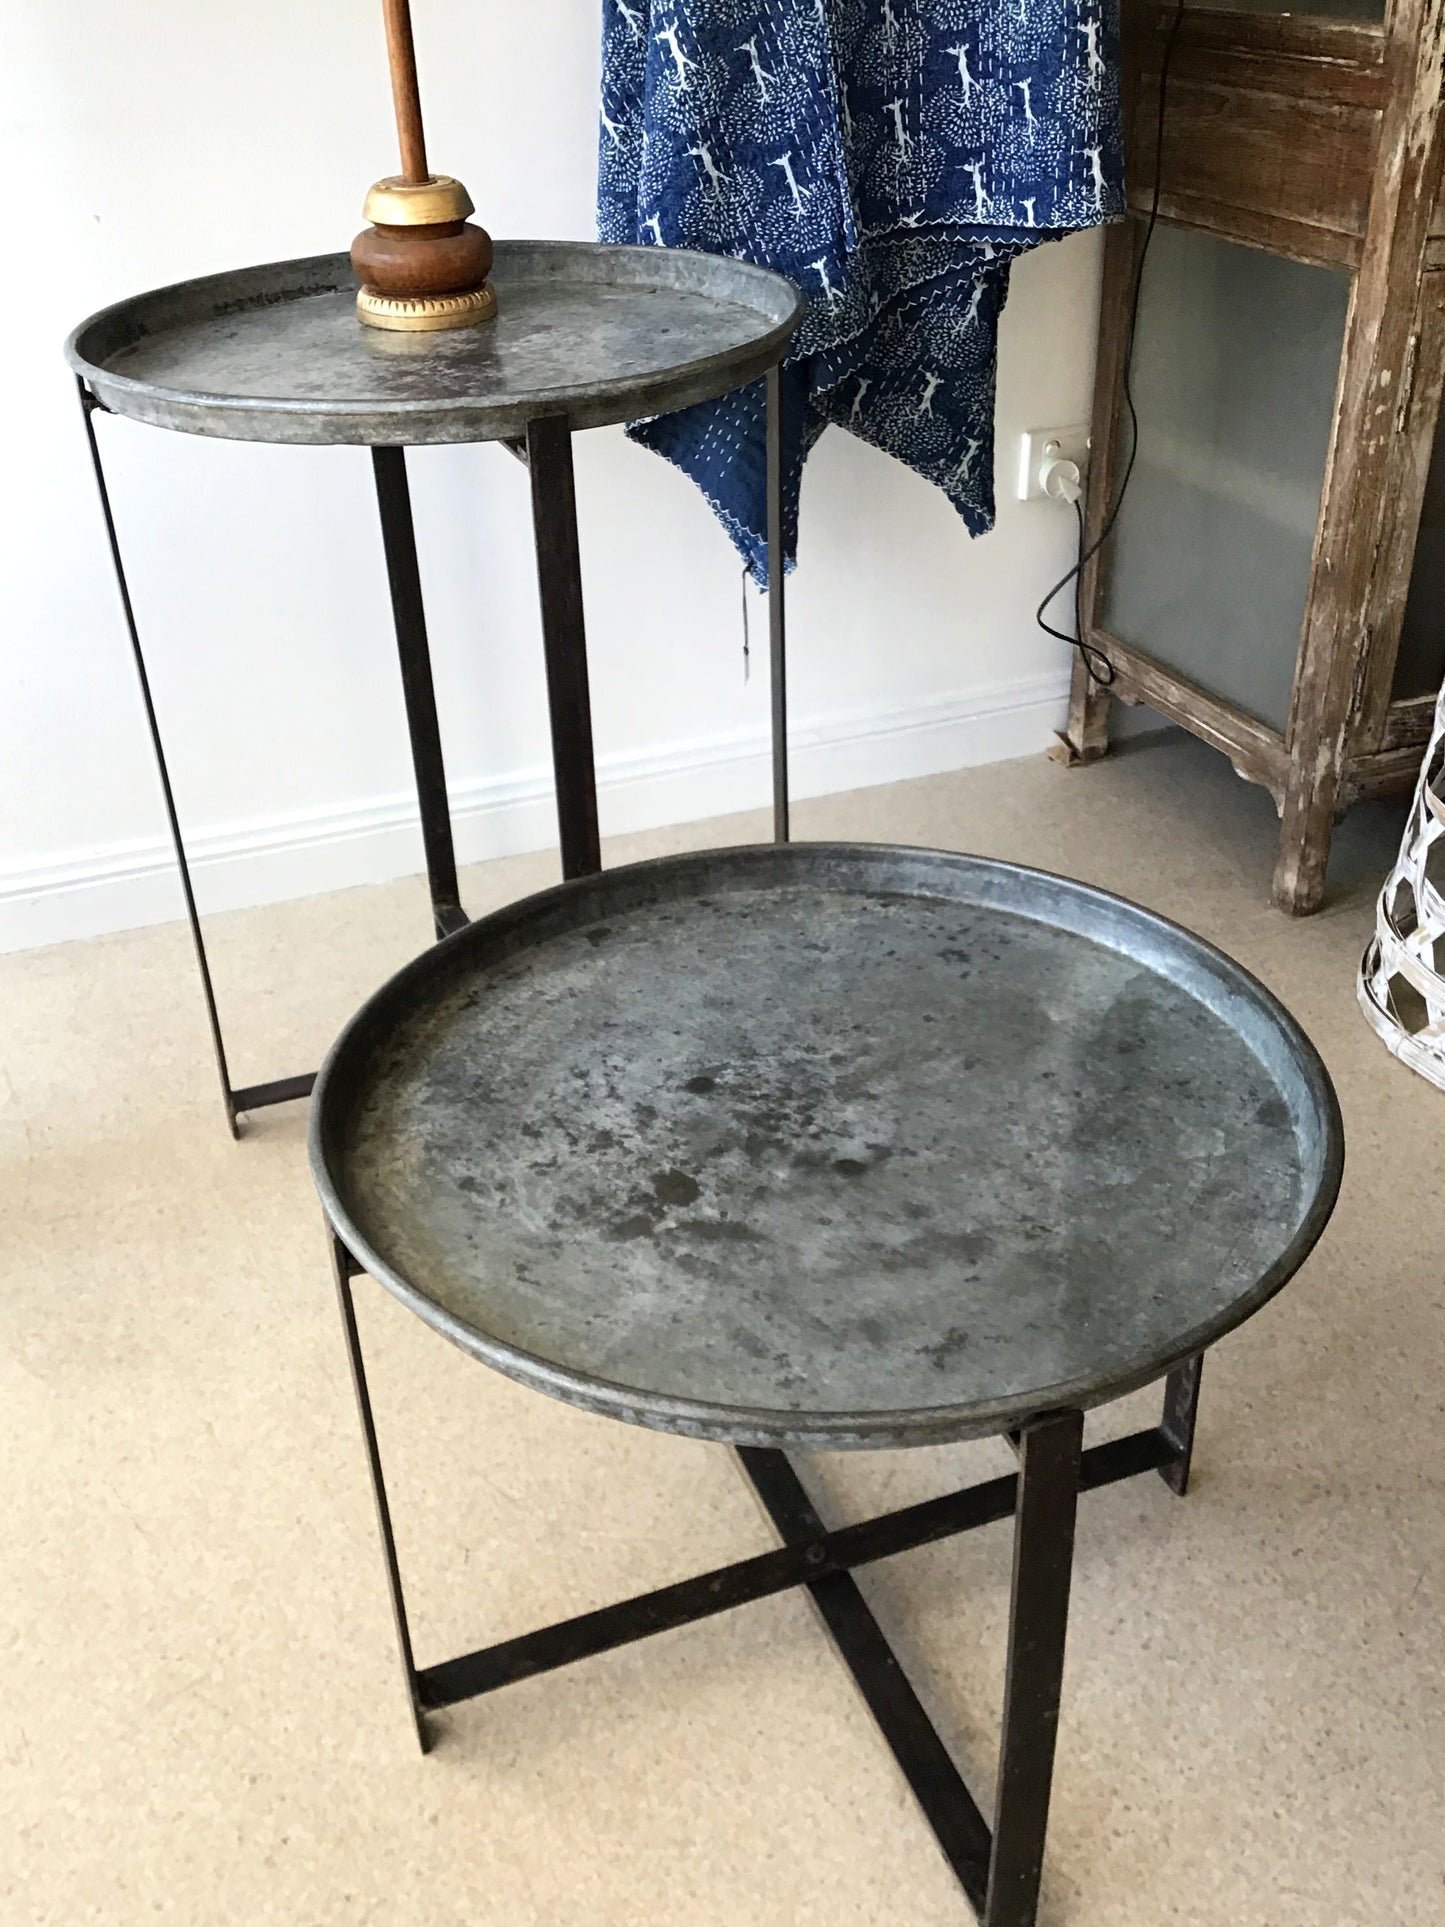 Low tray table with stand